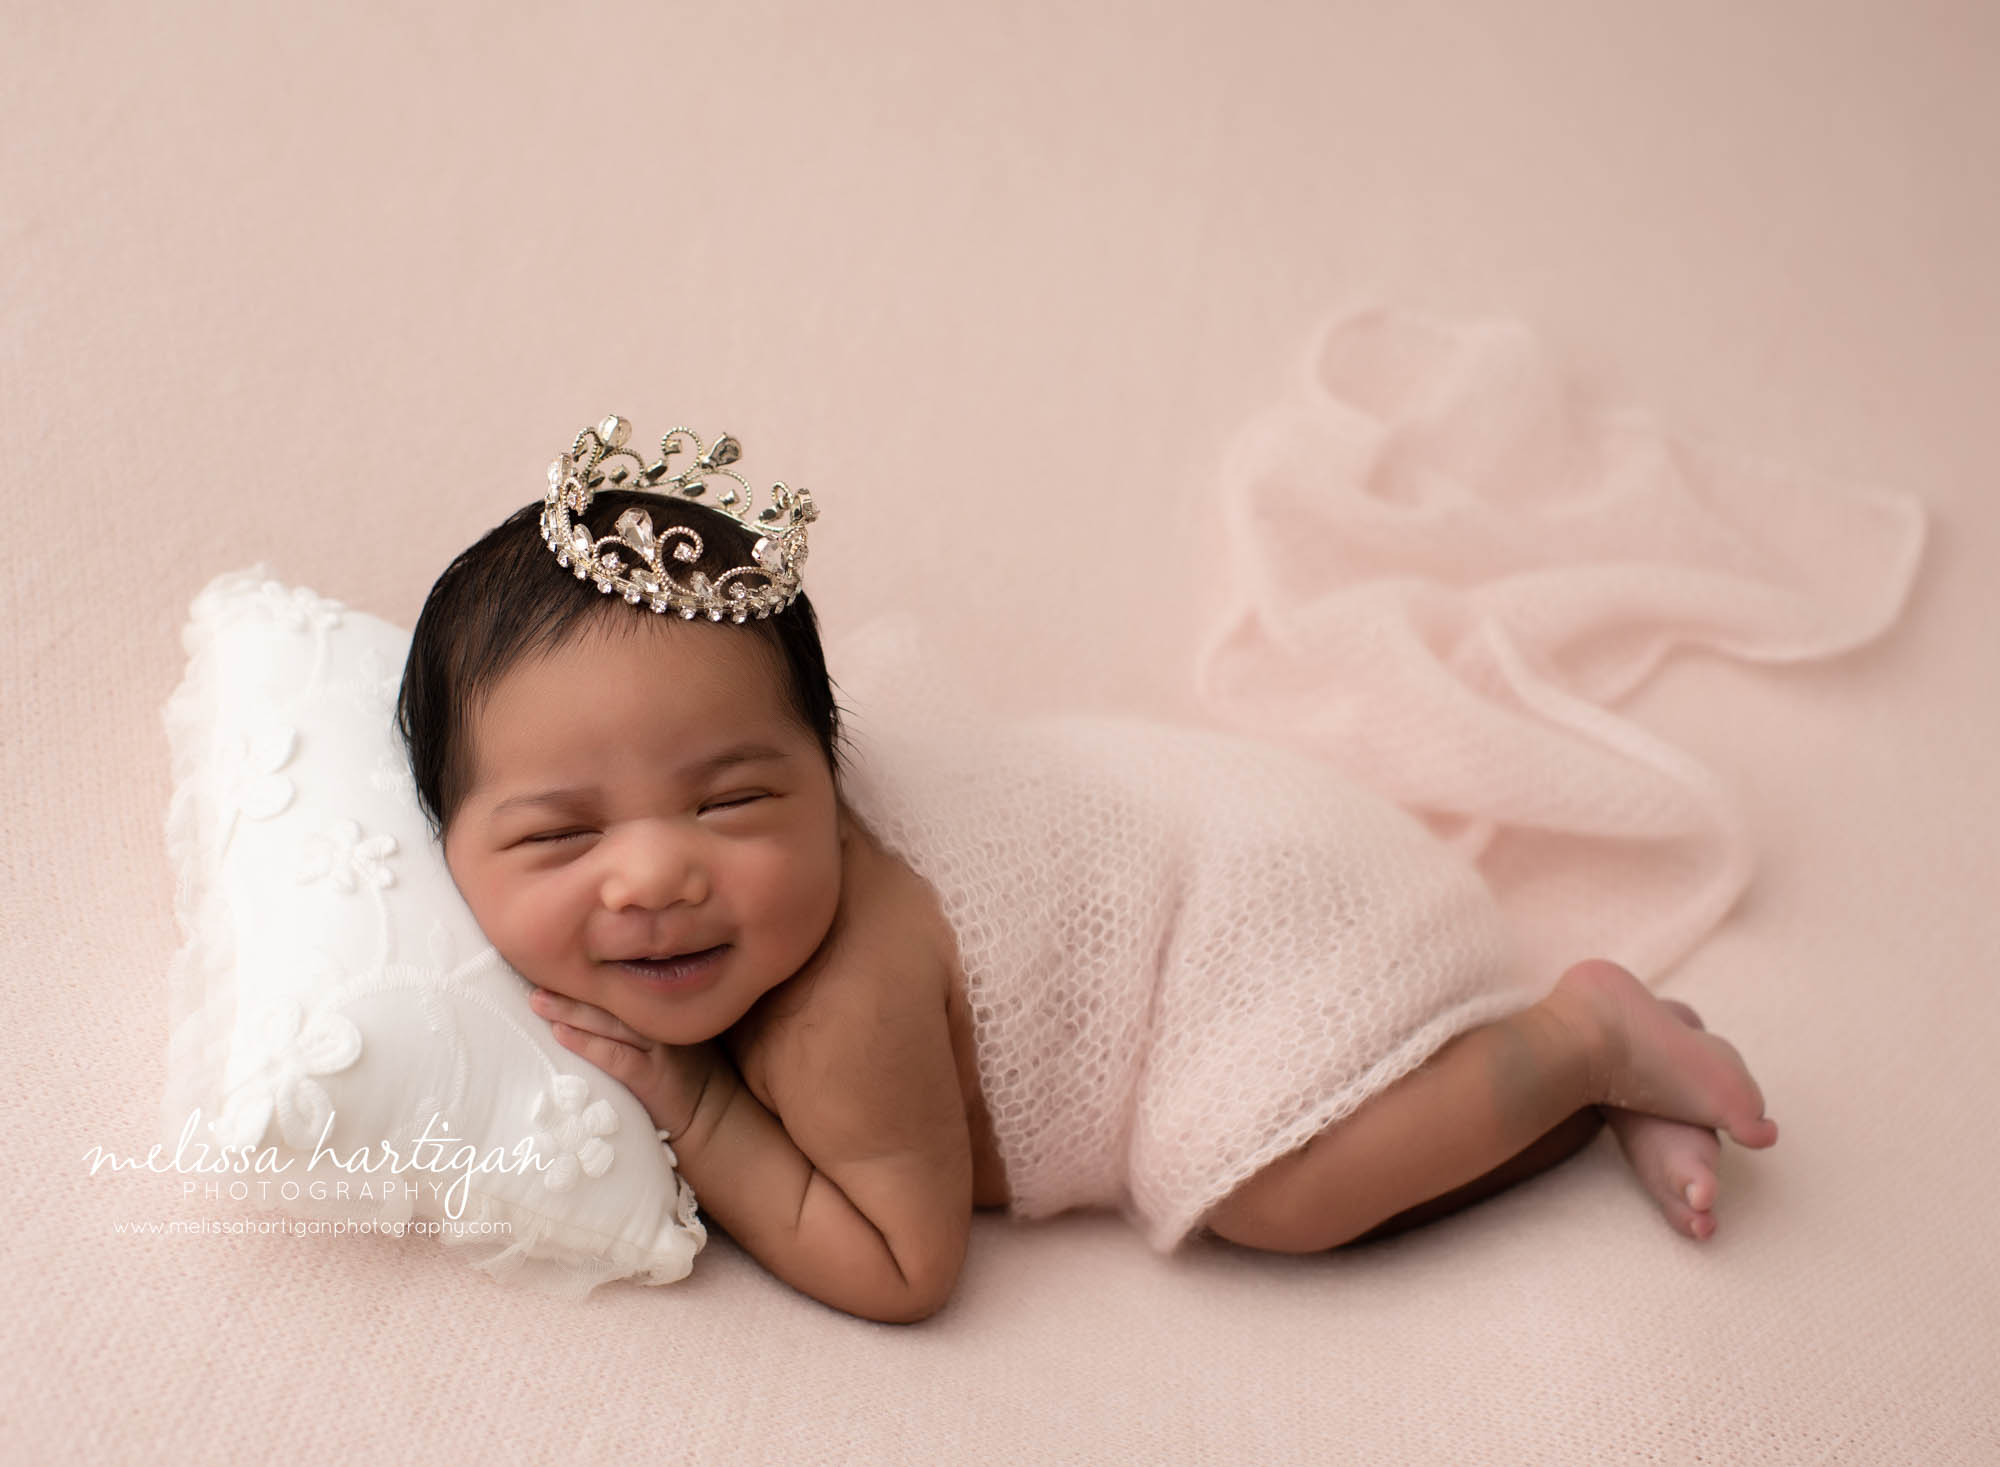 baby girl smiling posed on pink blanket with jeweled crown newborn pilow